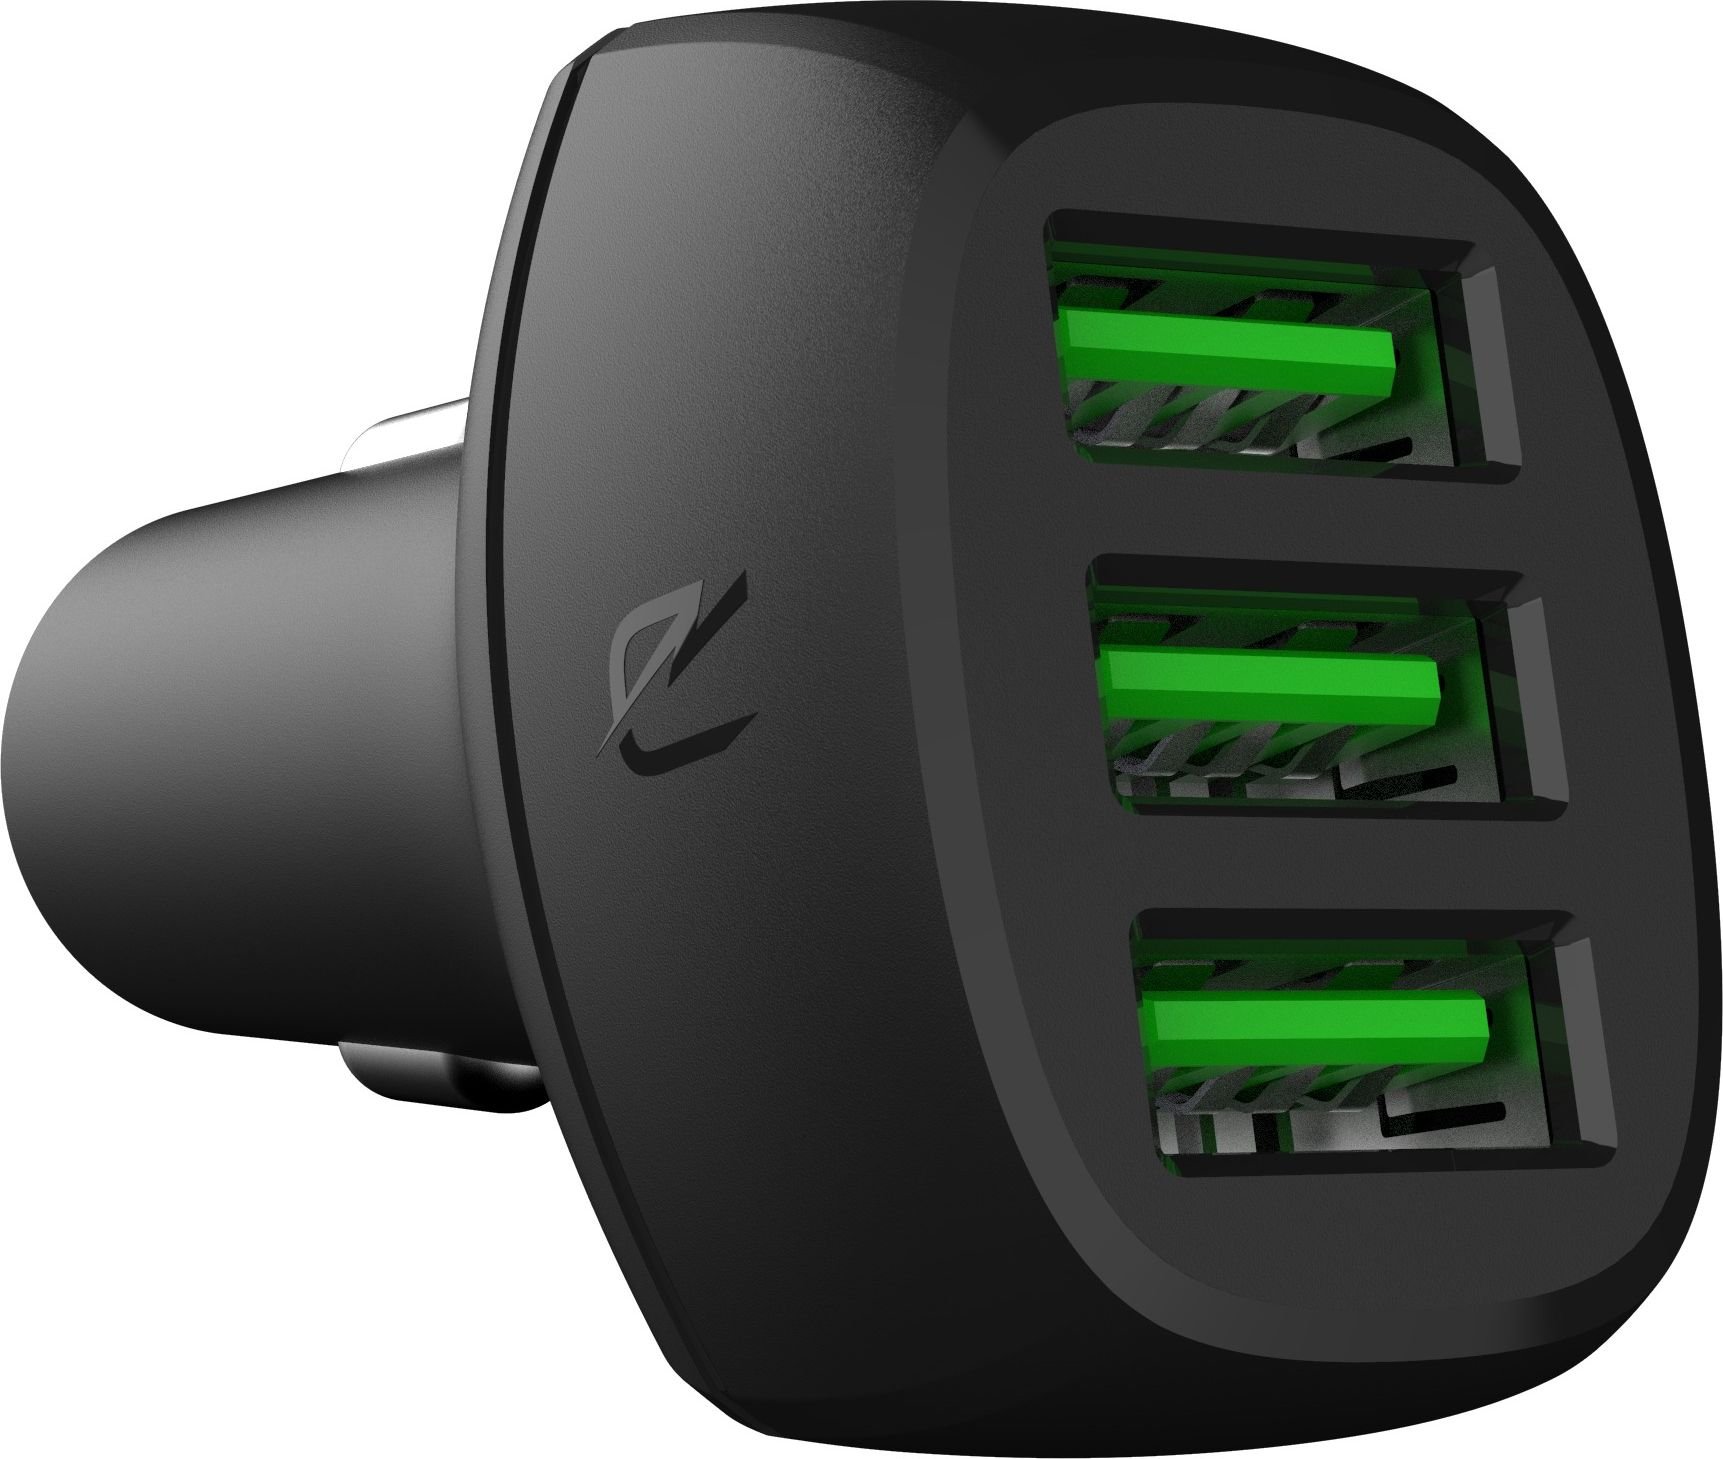 Incarcator auto Green Cell PowerRide, 54W, UltraCharge, 3 x USB-A, LED verde, Universal, Negru